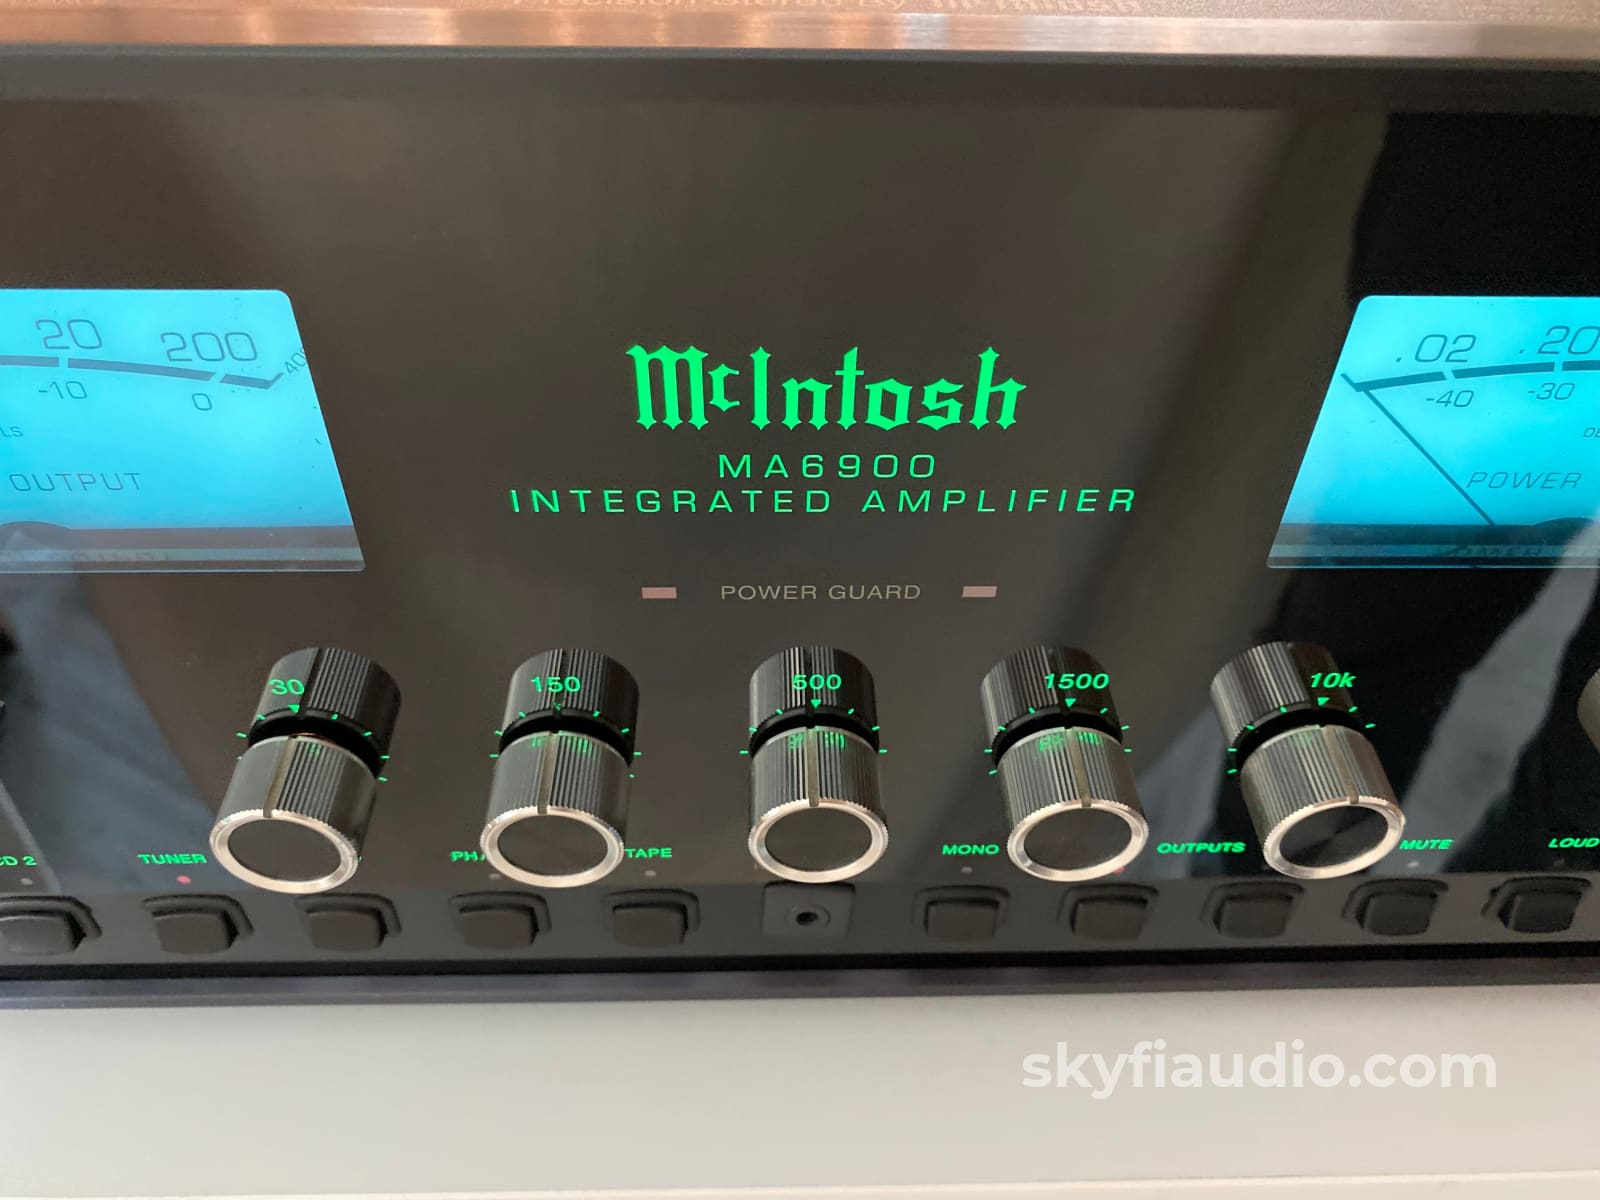 Mcintosh Ma6900 Integrated Amplifier - All Analog With Built-In Phono And Eq Serviced Integrated